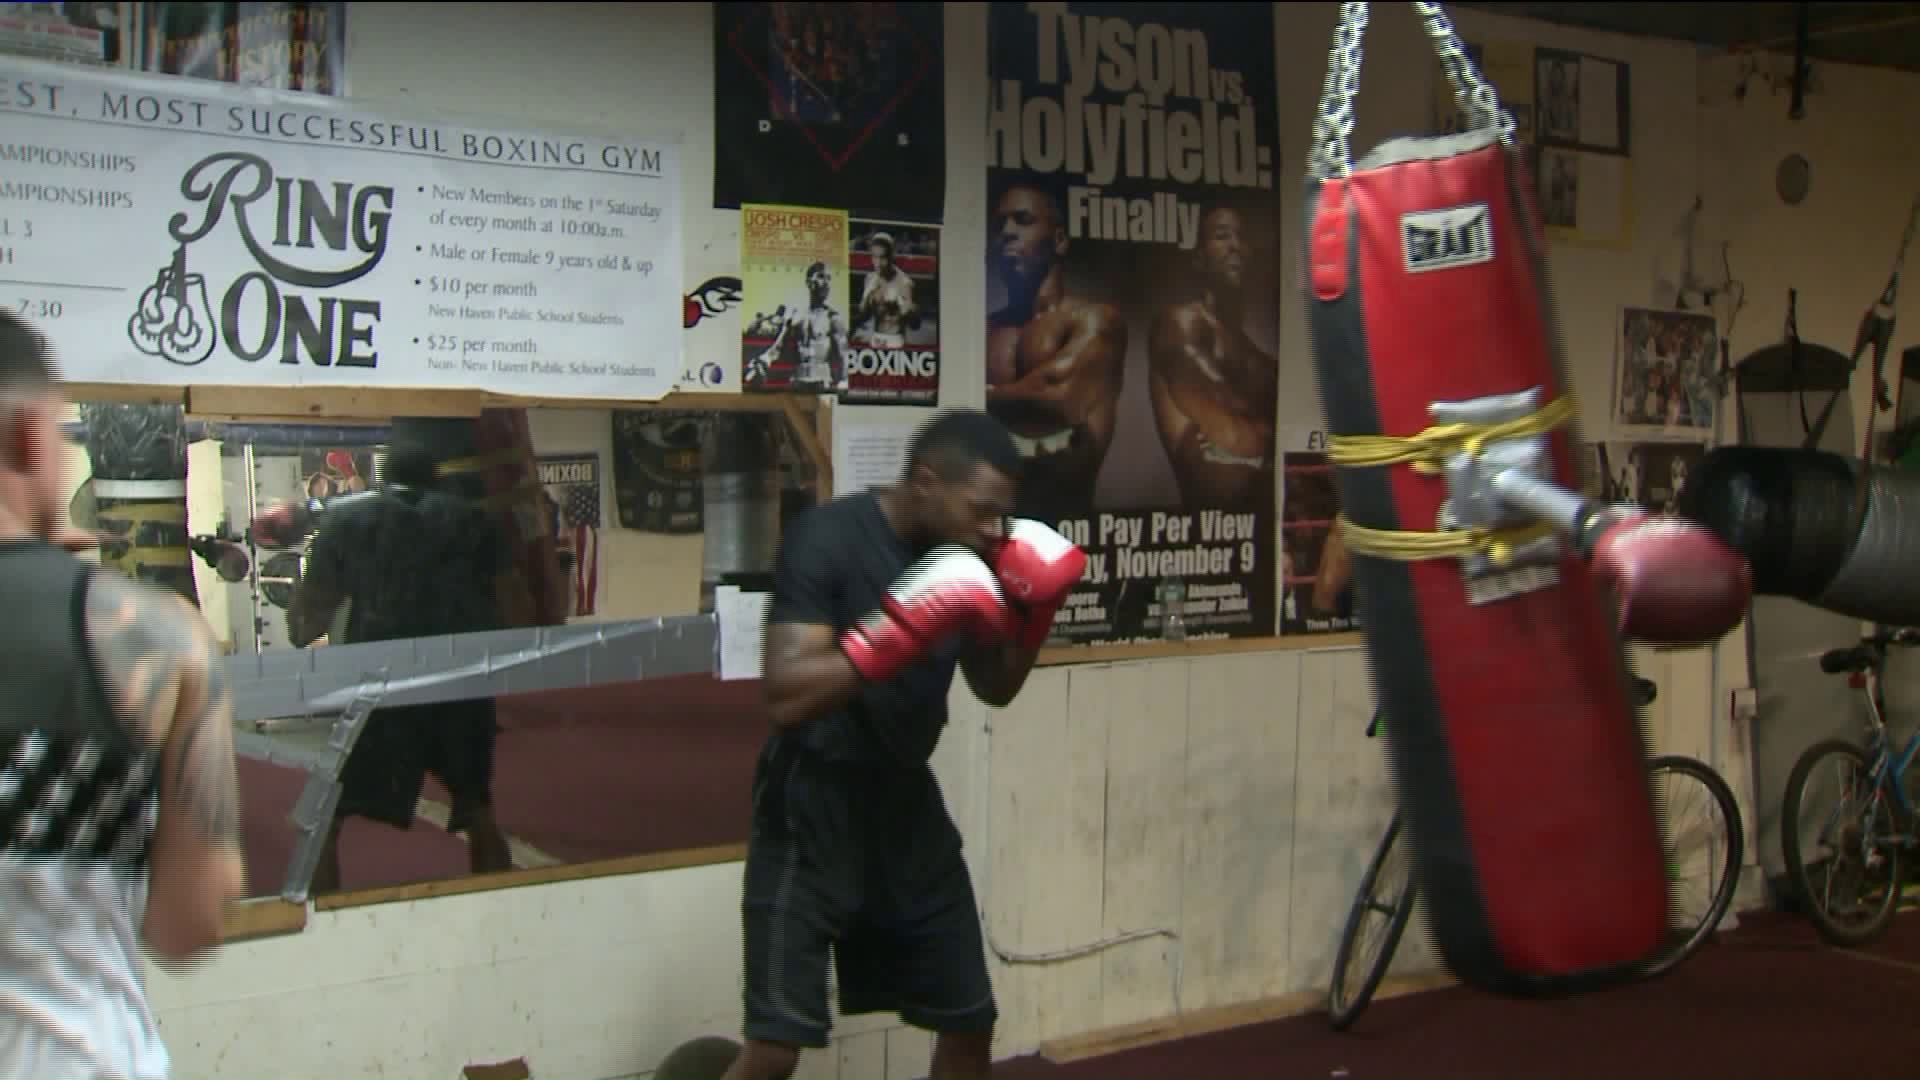 New Haven boxer preparing for title match Friday